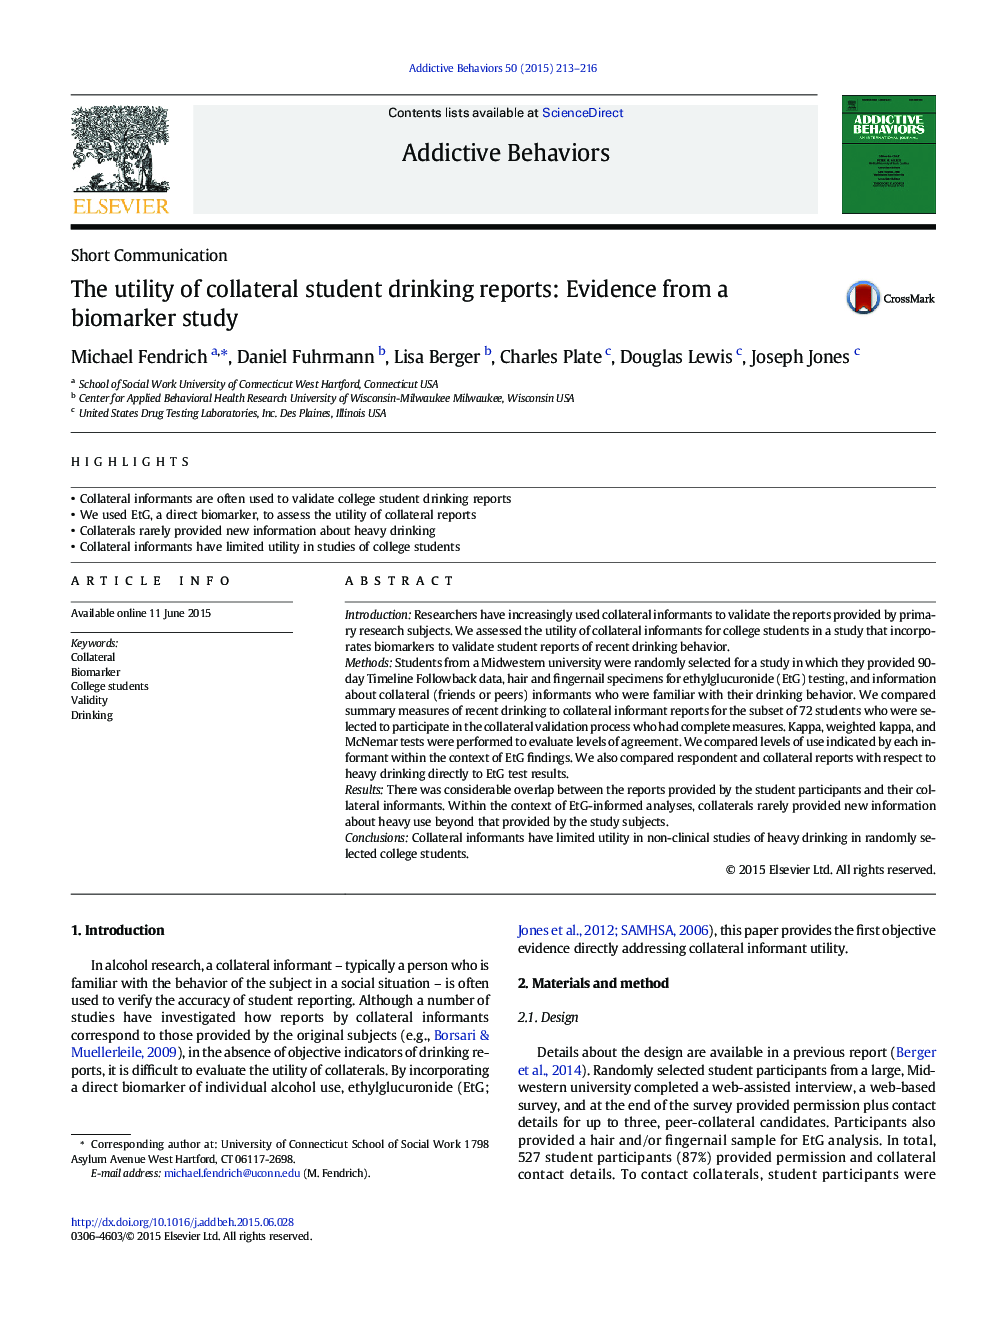 The utility of collateral student drinking reports: Evidence from a biomarker study